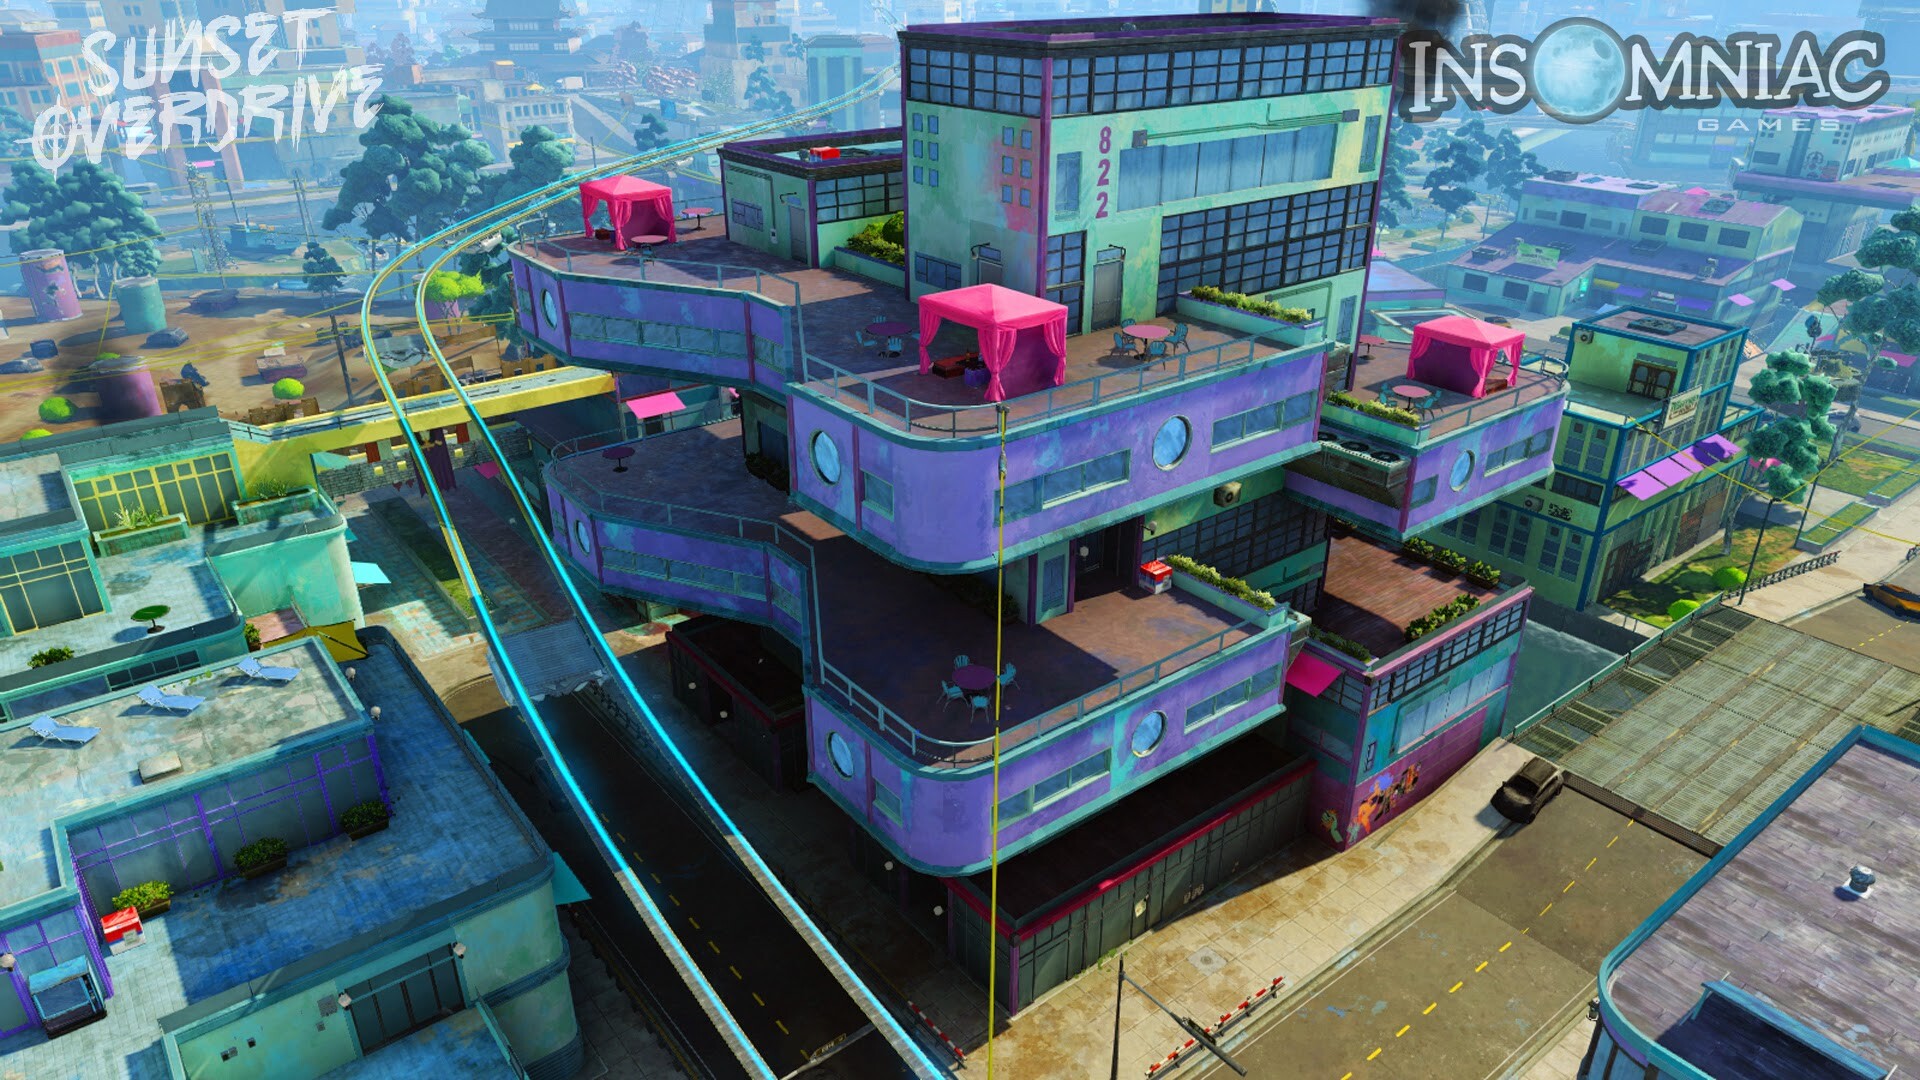 Video Games Cityscapes on X: Sunset Overdrive (2014) Sunset City.  Developed by Insomniac Games.  / X